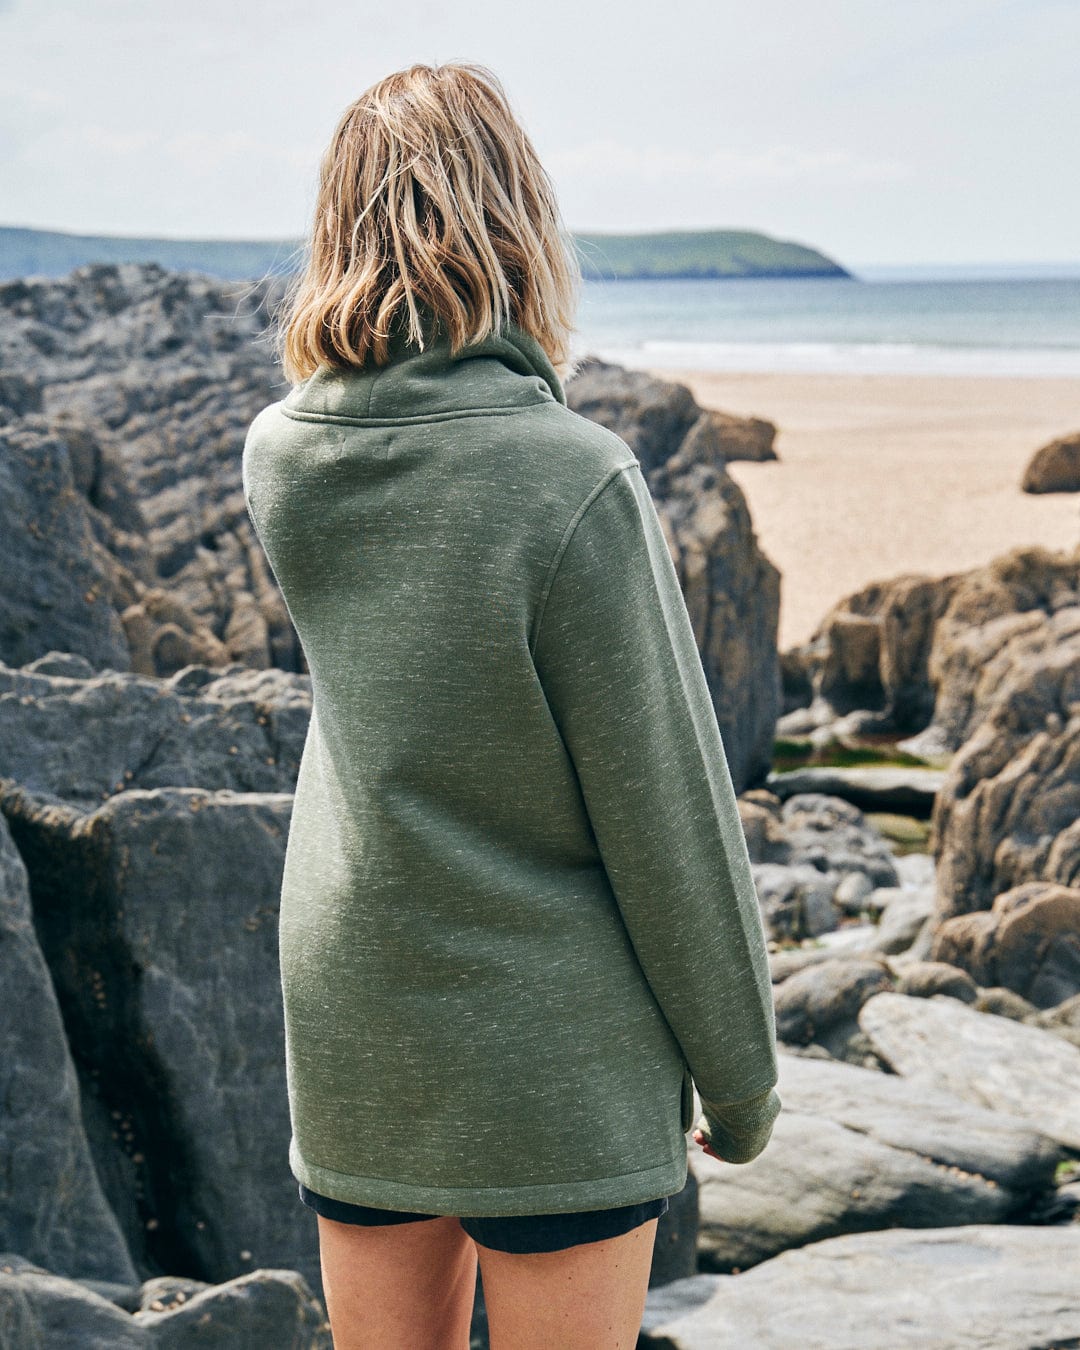 A person with shoulder-length blond hair, wearing the Saltrock Harper - Women's Longline Pop Sweat in green and shorts, stands on rocky terrain looking towards a distant sandy beach and ocean.